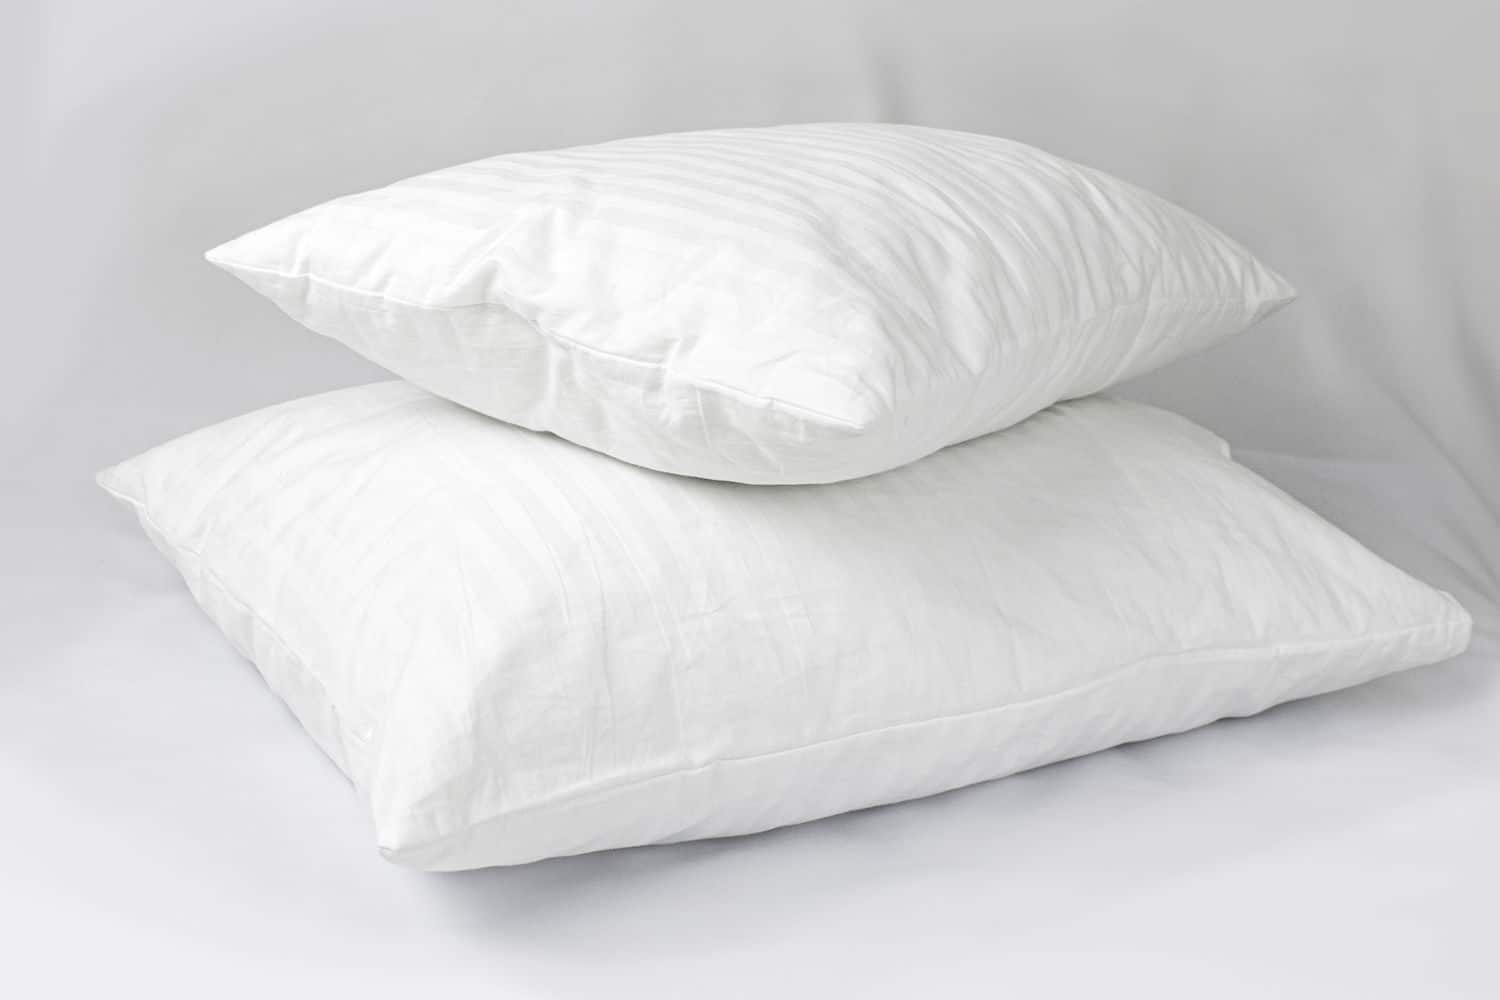  ZXIIXZ 350g Polyester Fill, Pillow Stuffing, Recycled